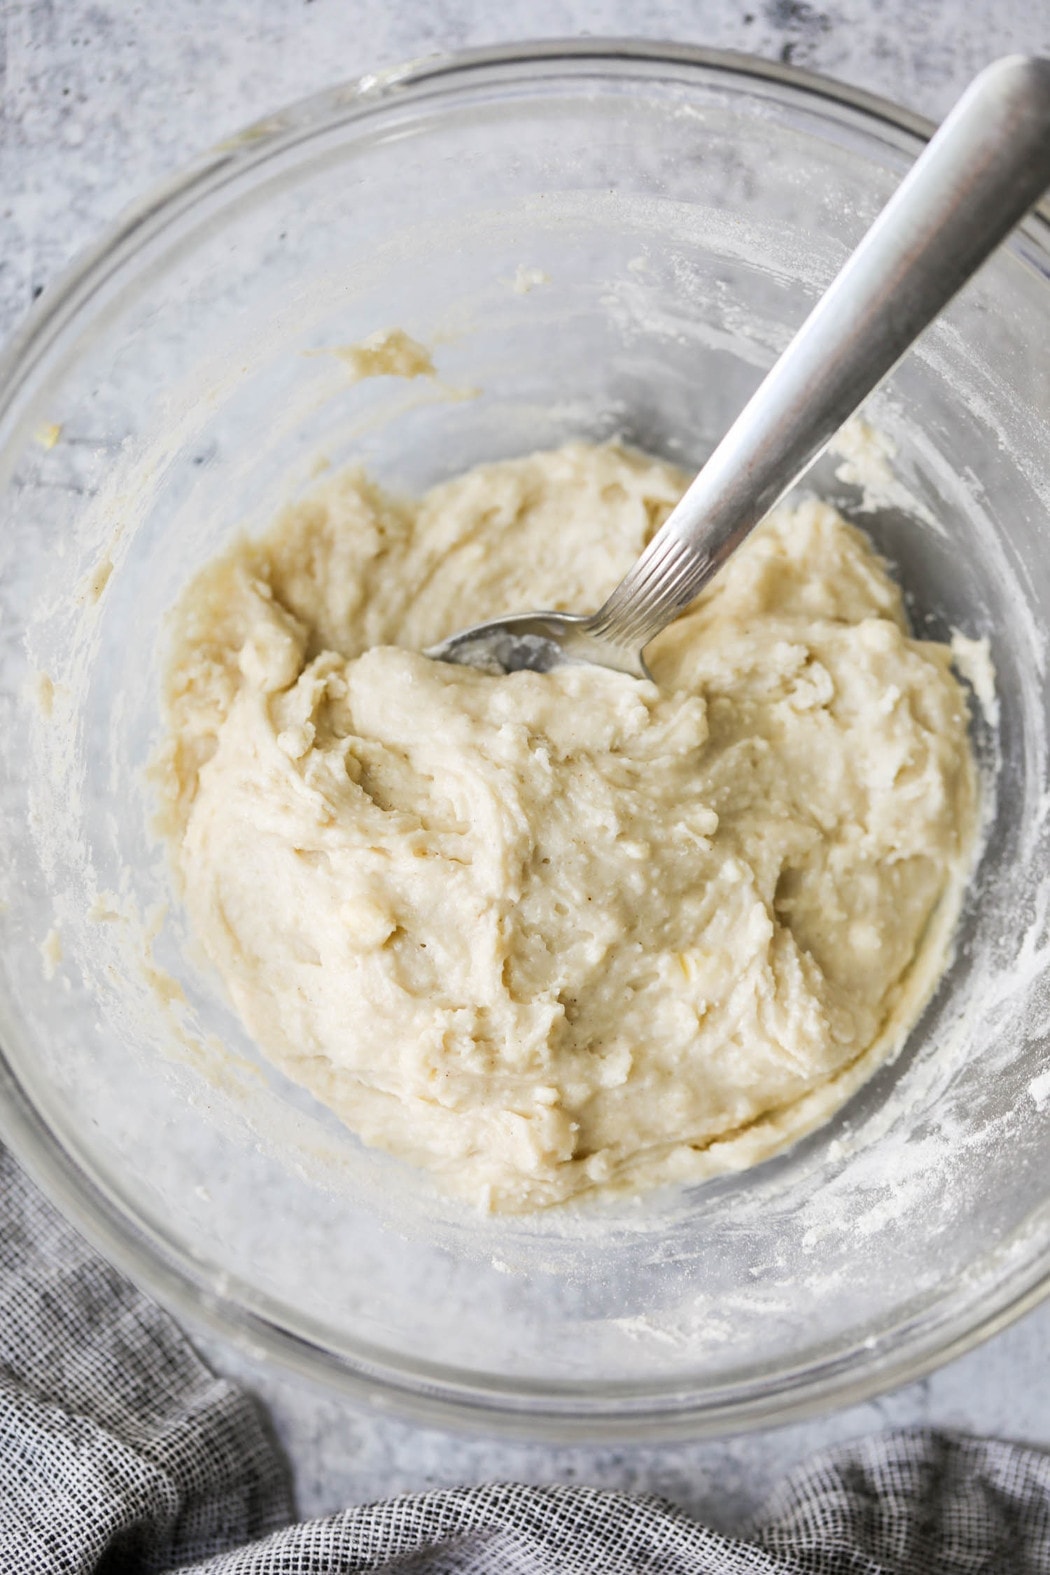 Gluten-free biscuit dough in a mixing bowl